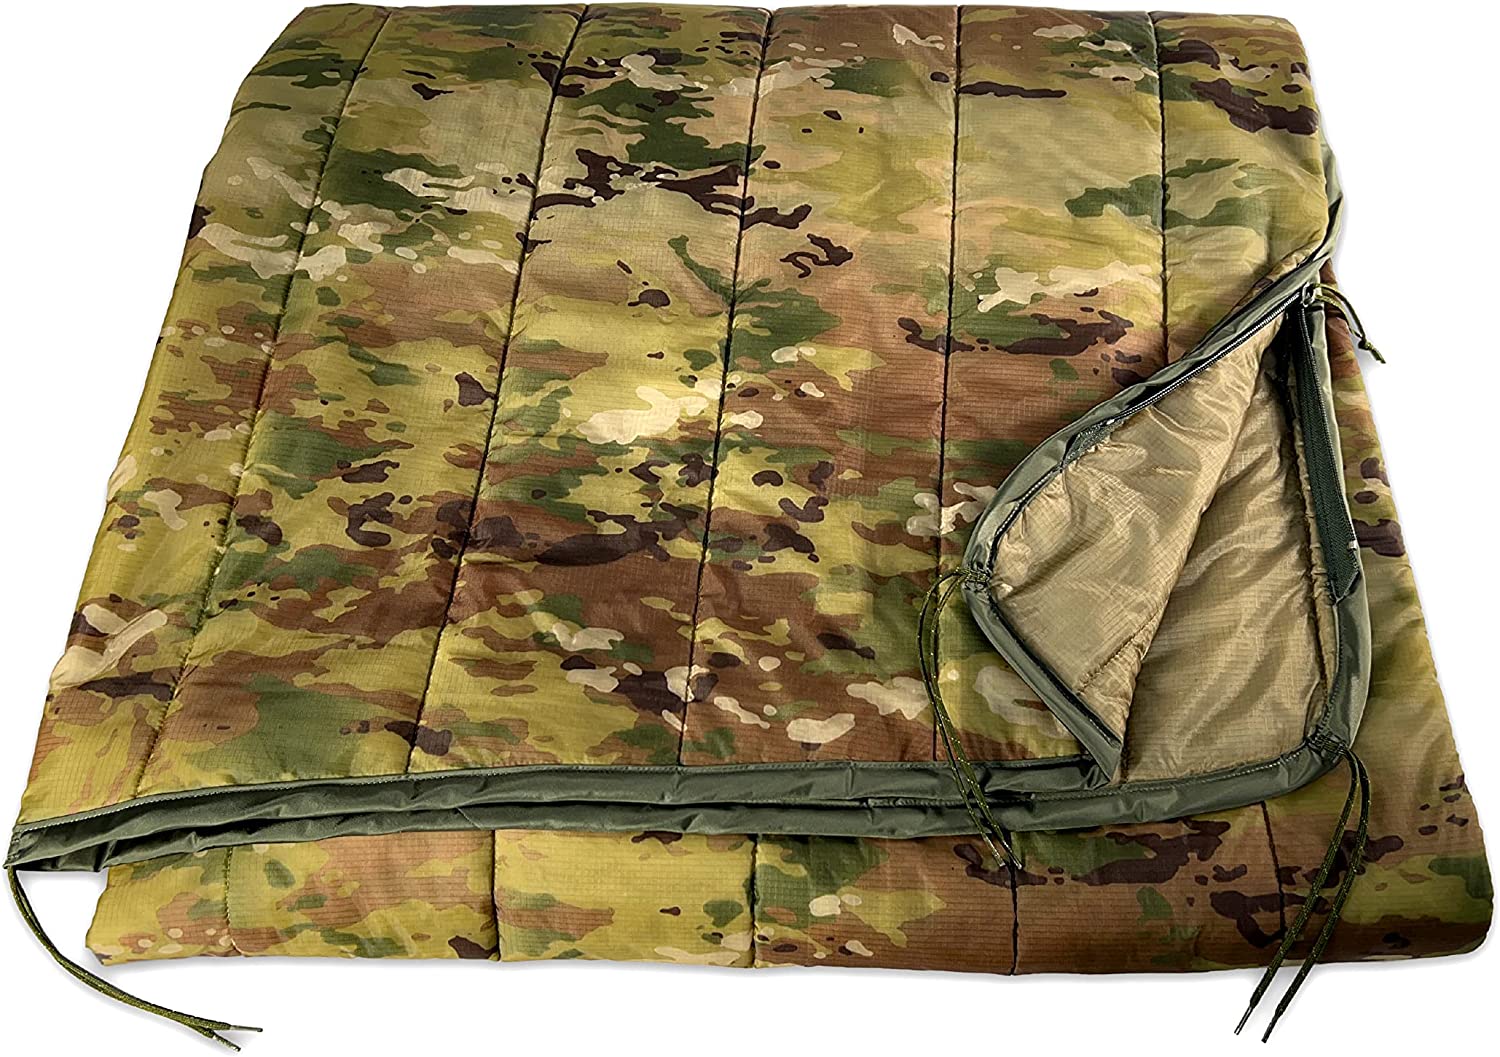 Pinnacle Mercantile Authentic Military Woobie with Zipper Made in USA by Winston-Salem Industries for The Blind OCP Camo Sleeping Bag Poncho Liner Multi Use Camping Blanket Exact US Army Specs